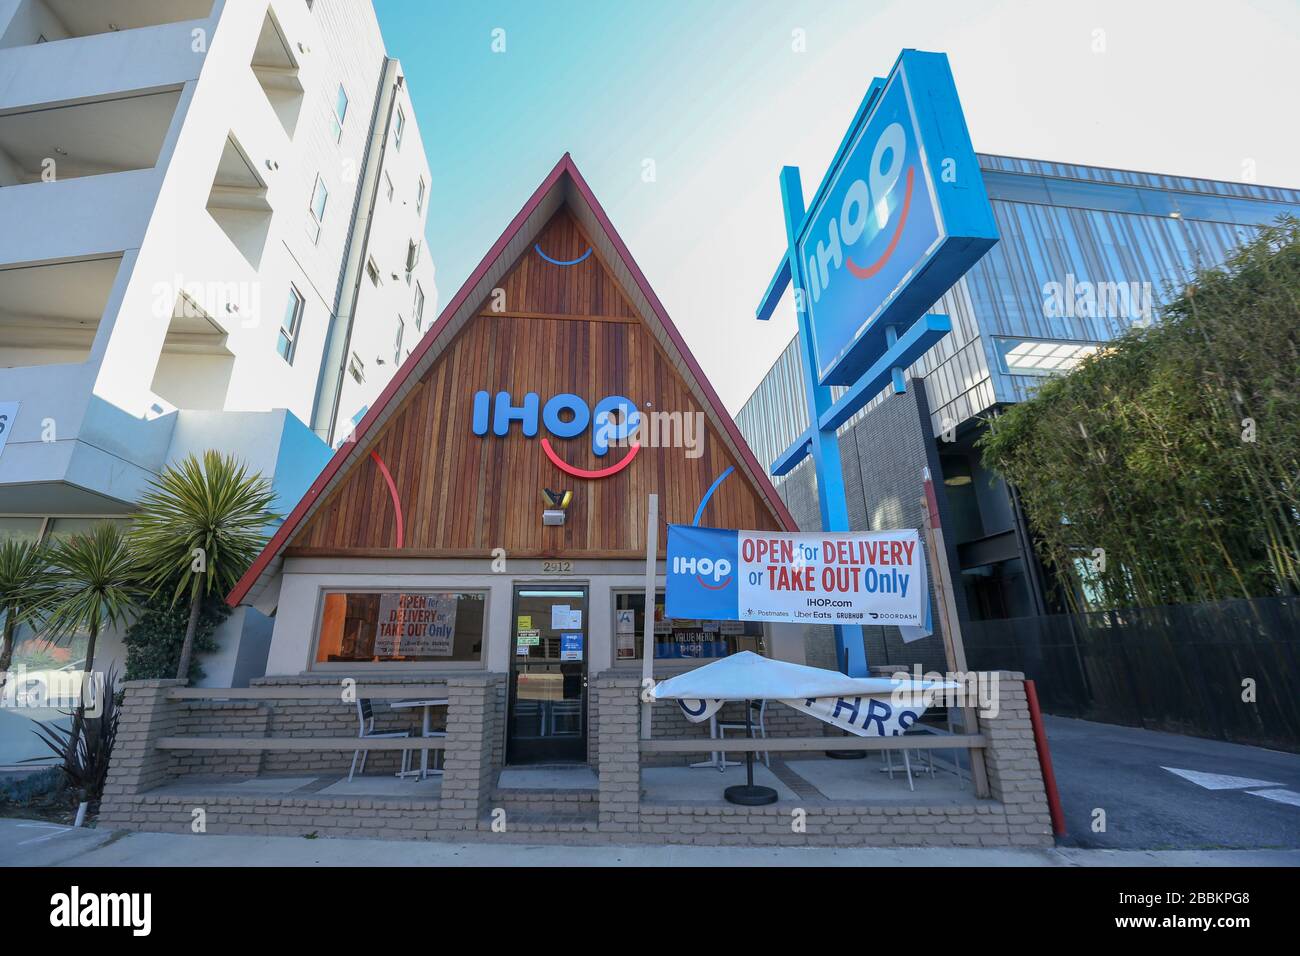 General view of IHOP, located at 2912 S Sepulveda Blvd, in the wake of the  coronavirus COVID-19 pandemic, on Thursday, March 26, 2020 in Los Angeles,  California, USA. (Photo by IOS/Espa-Images Stock